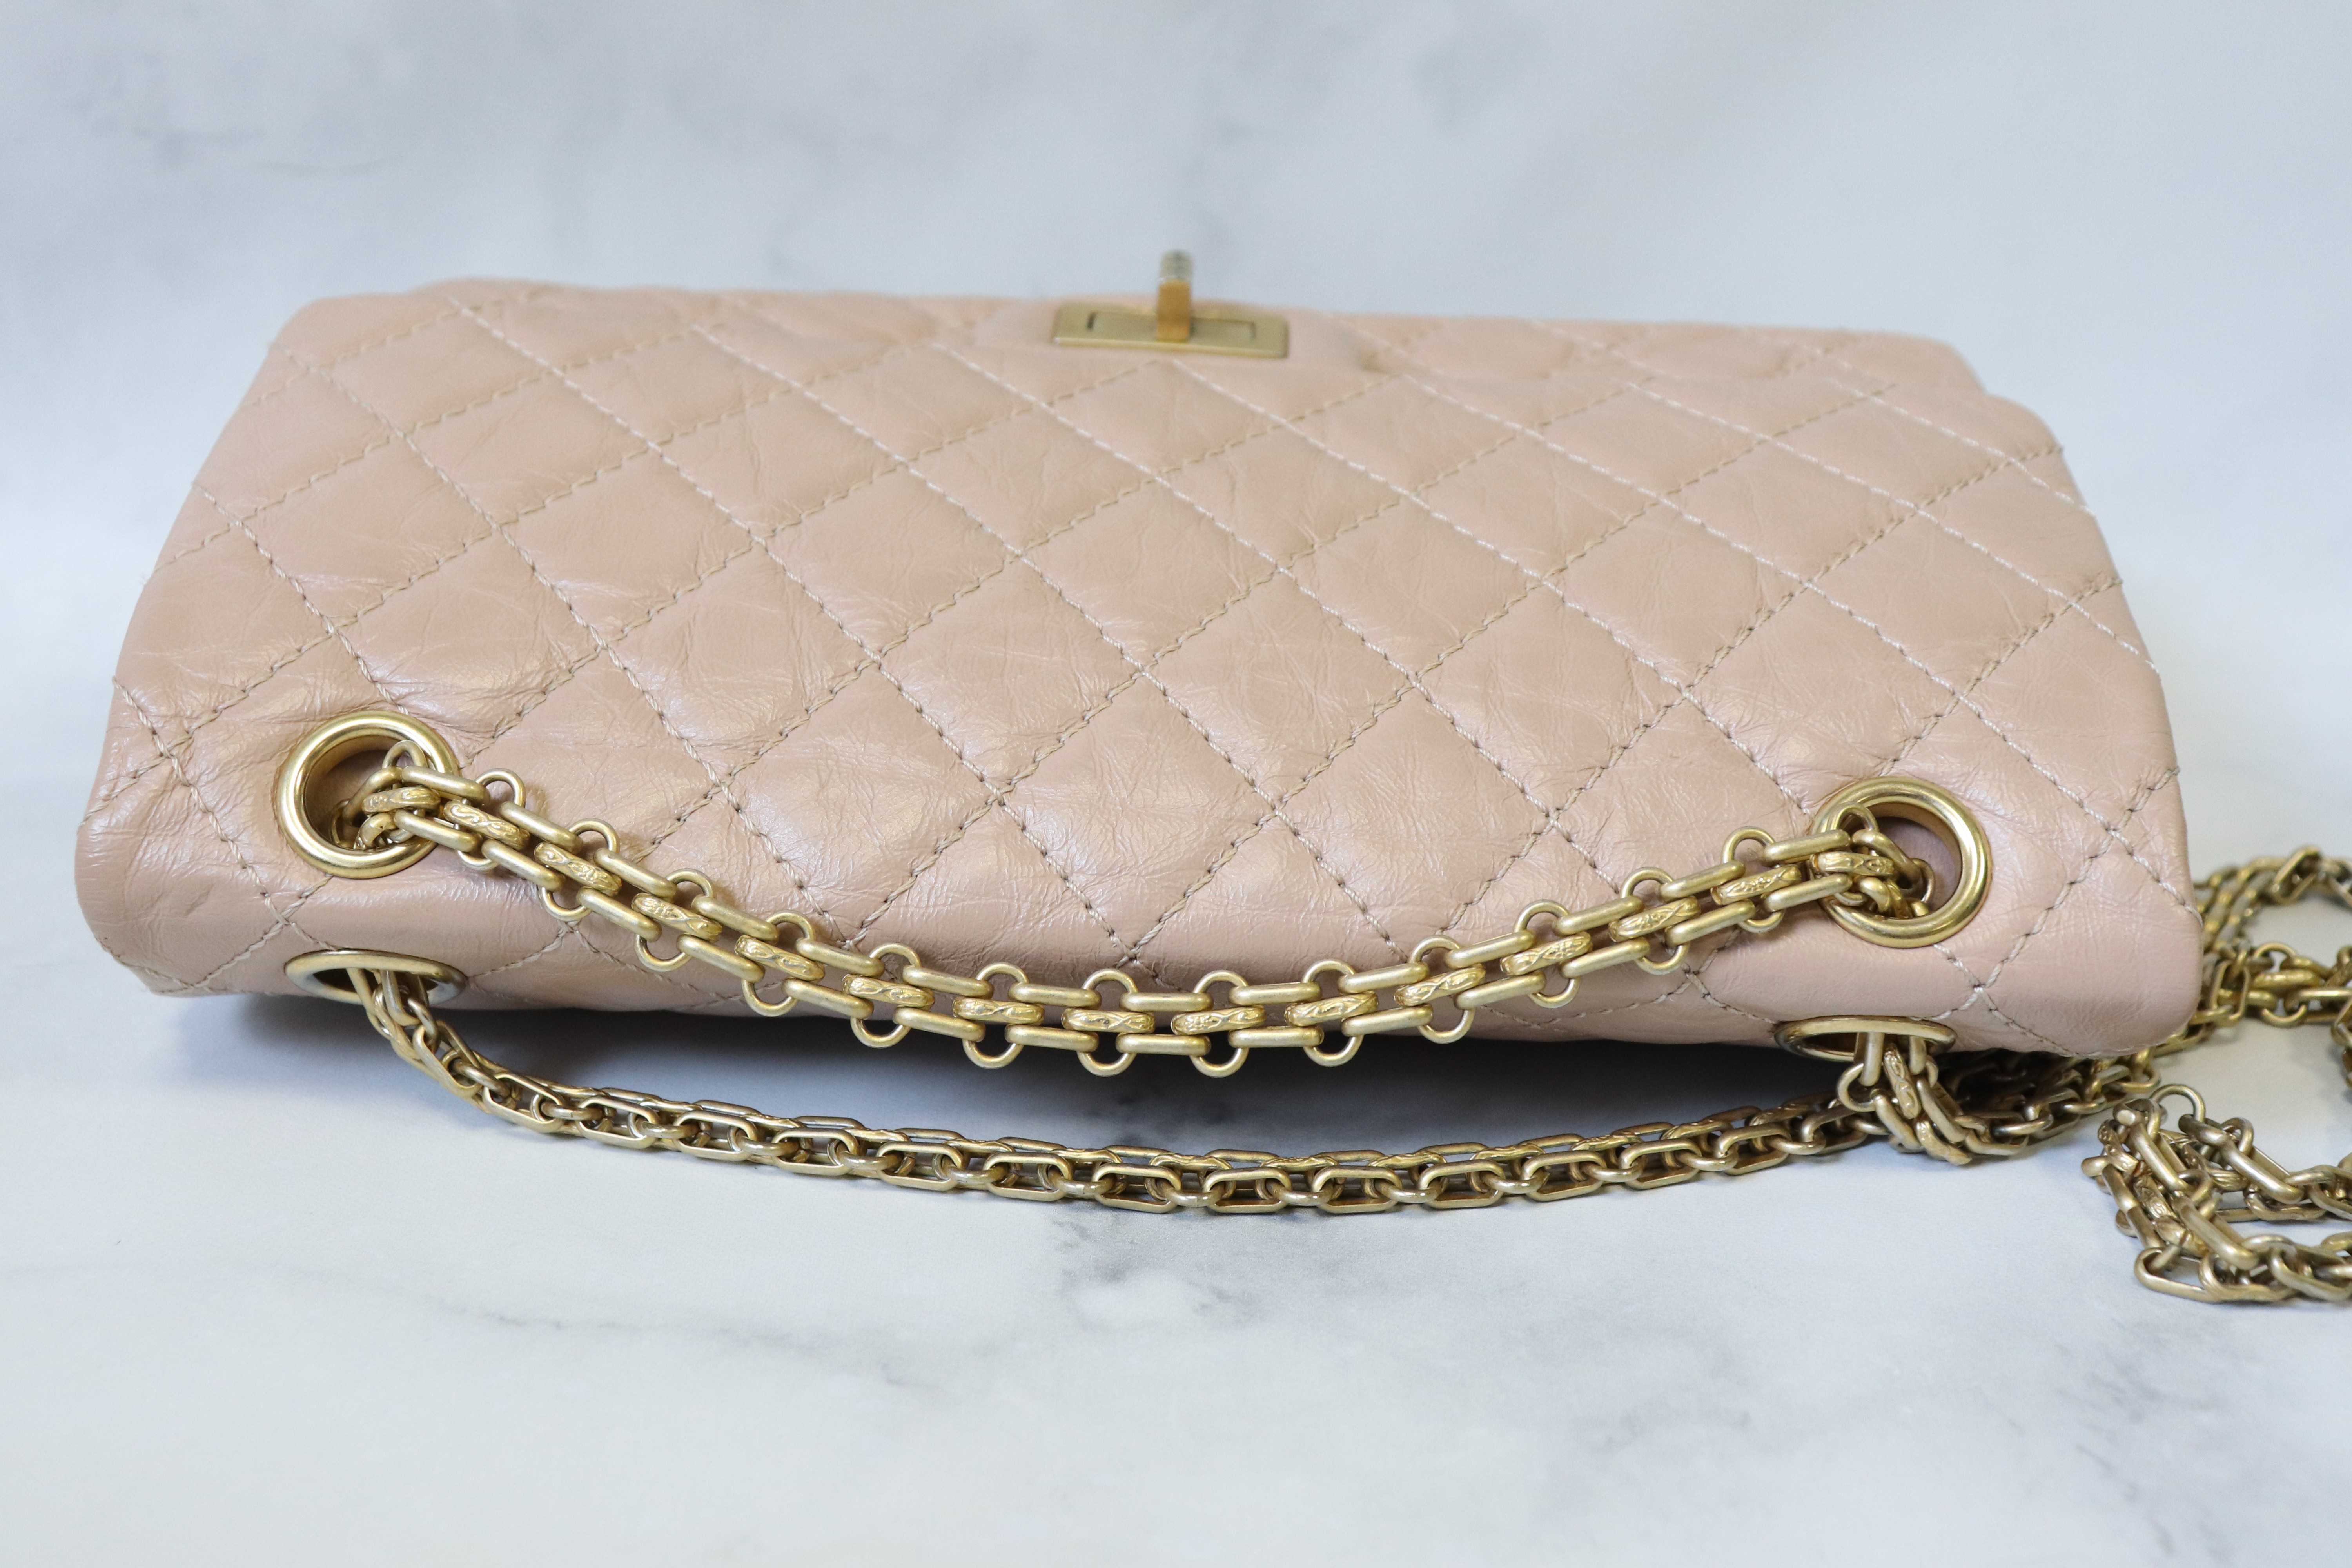 Chanel Reissue 225 Beige Calfskin Leather, Antique Gold Hardware, Preowned  in Dustbag